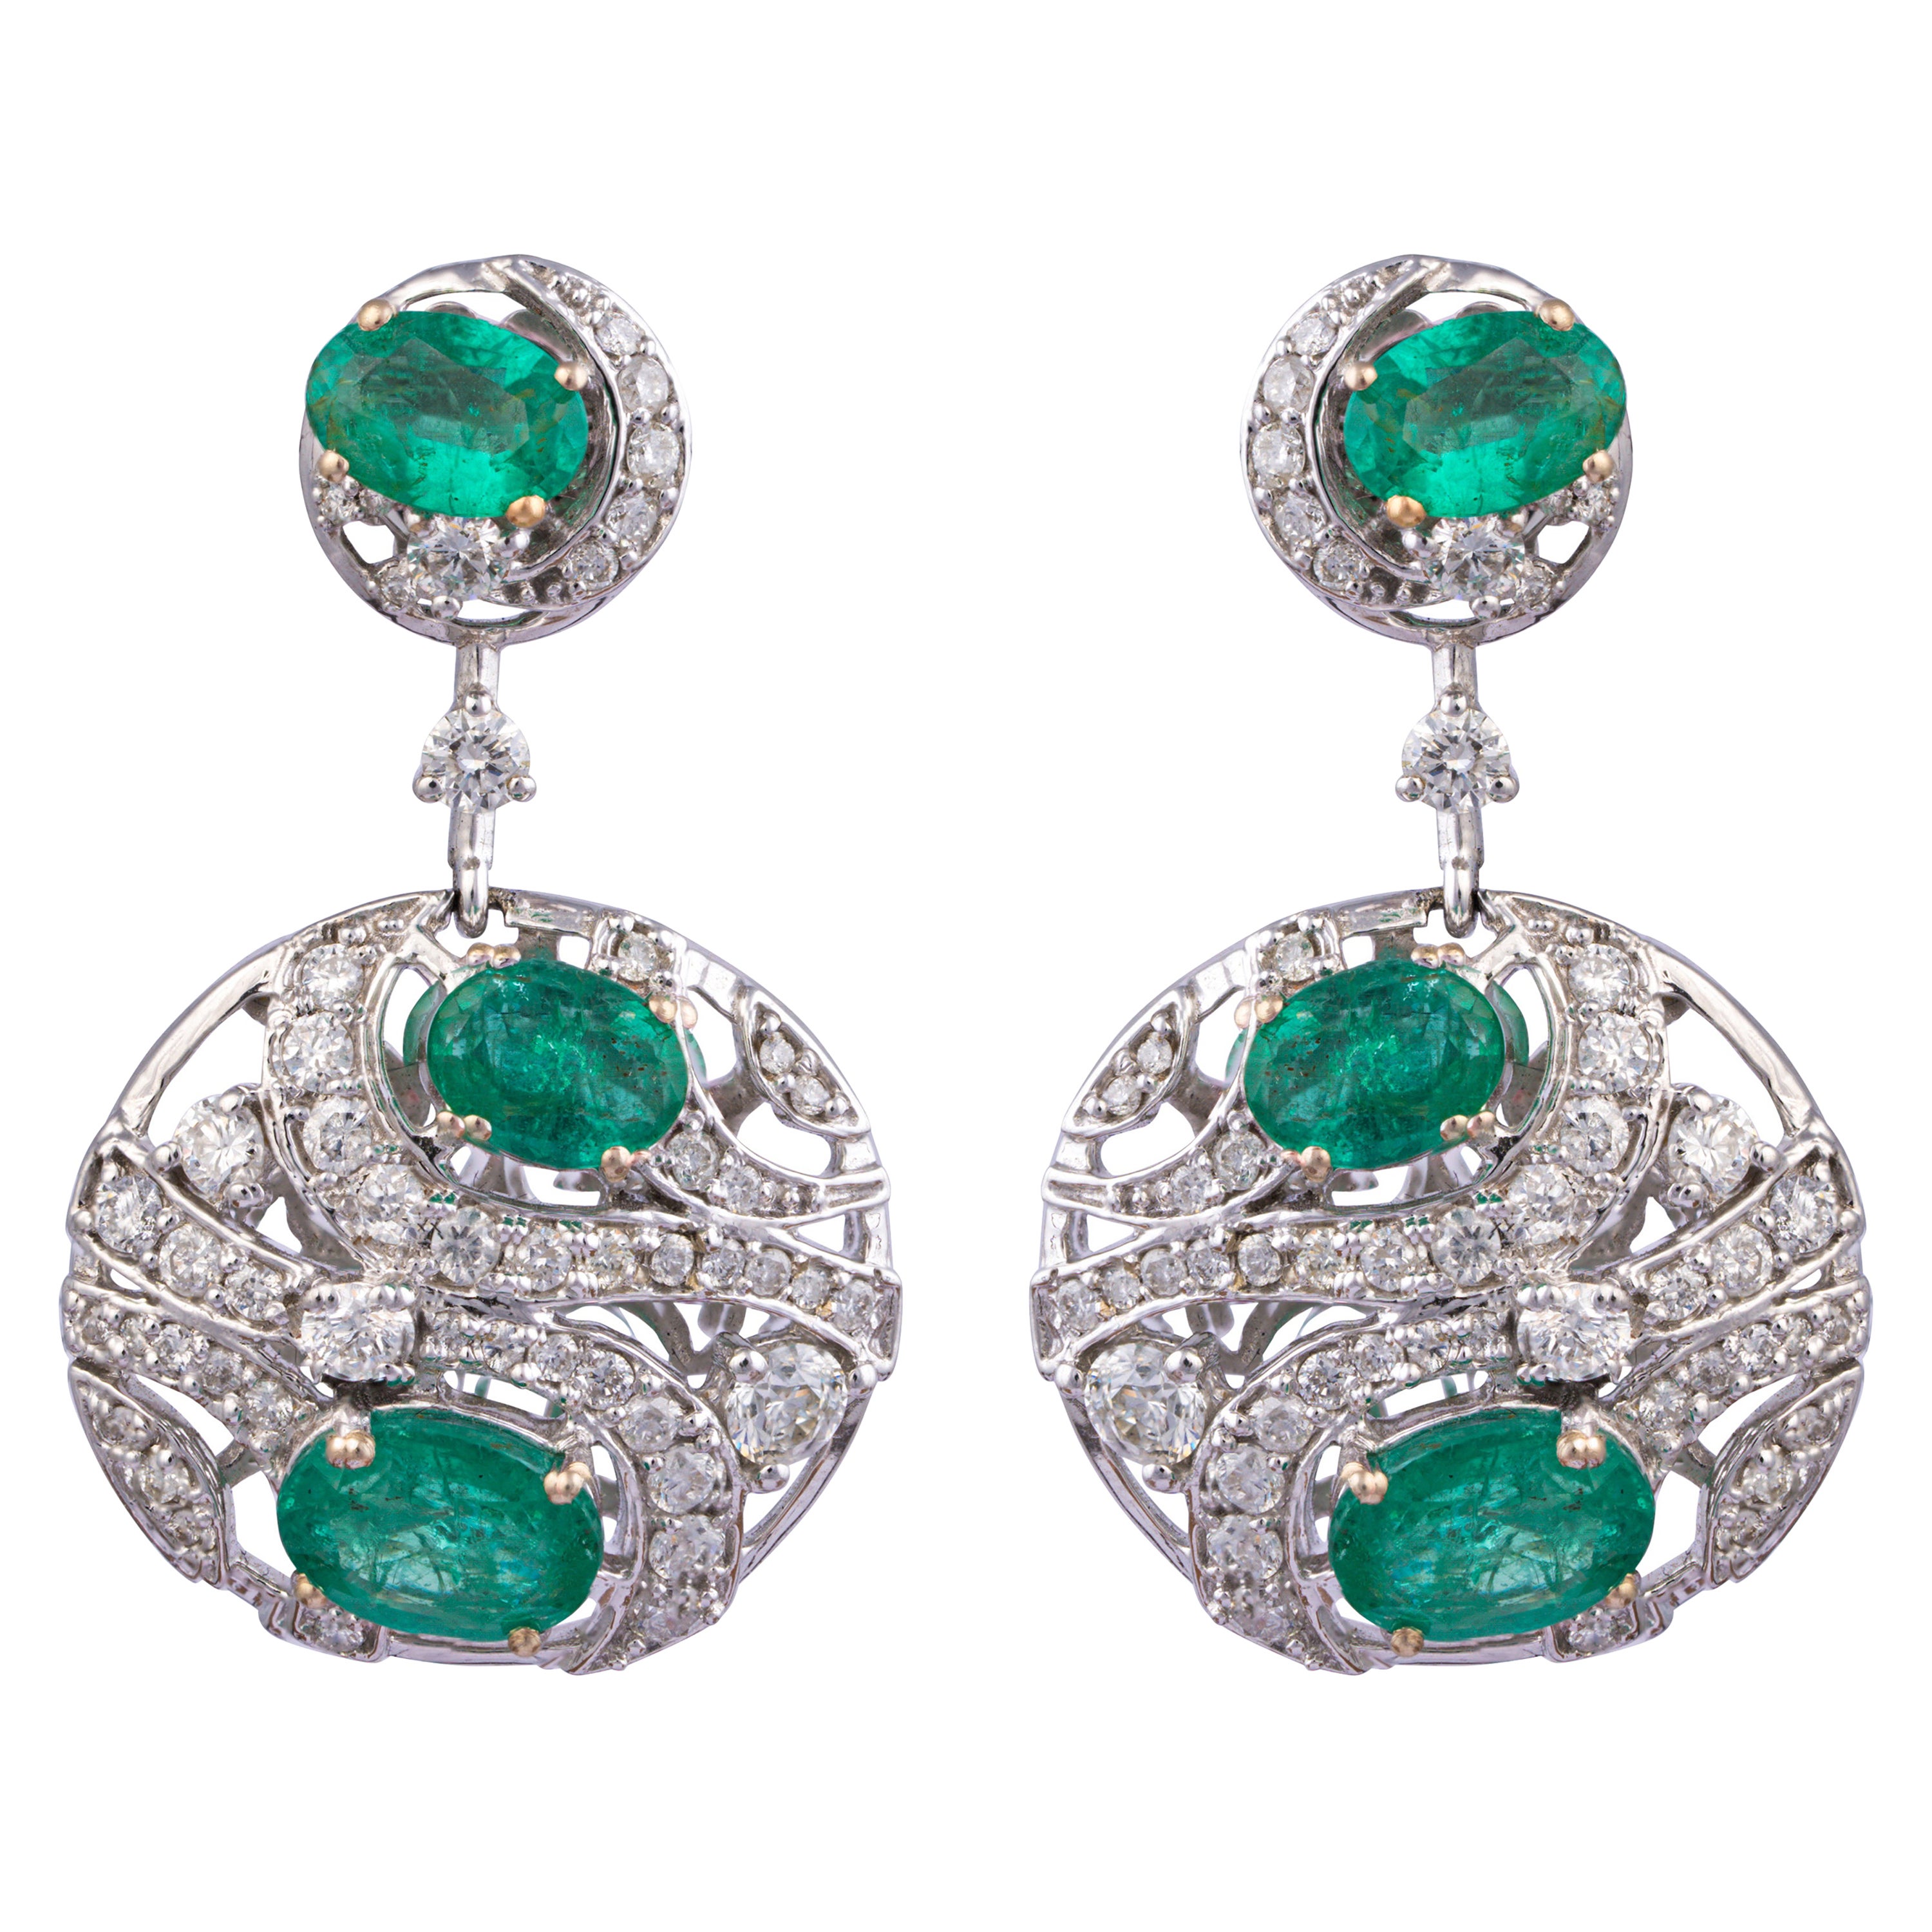 18k gold 1.81cts Diamond & 4.88cts Emerald Earring